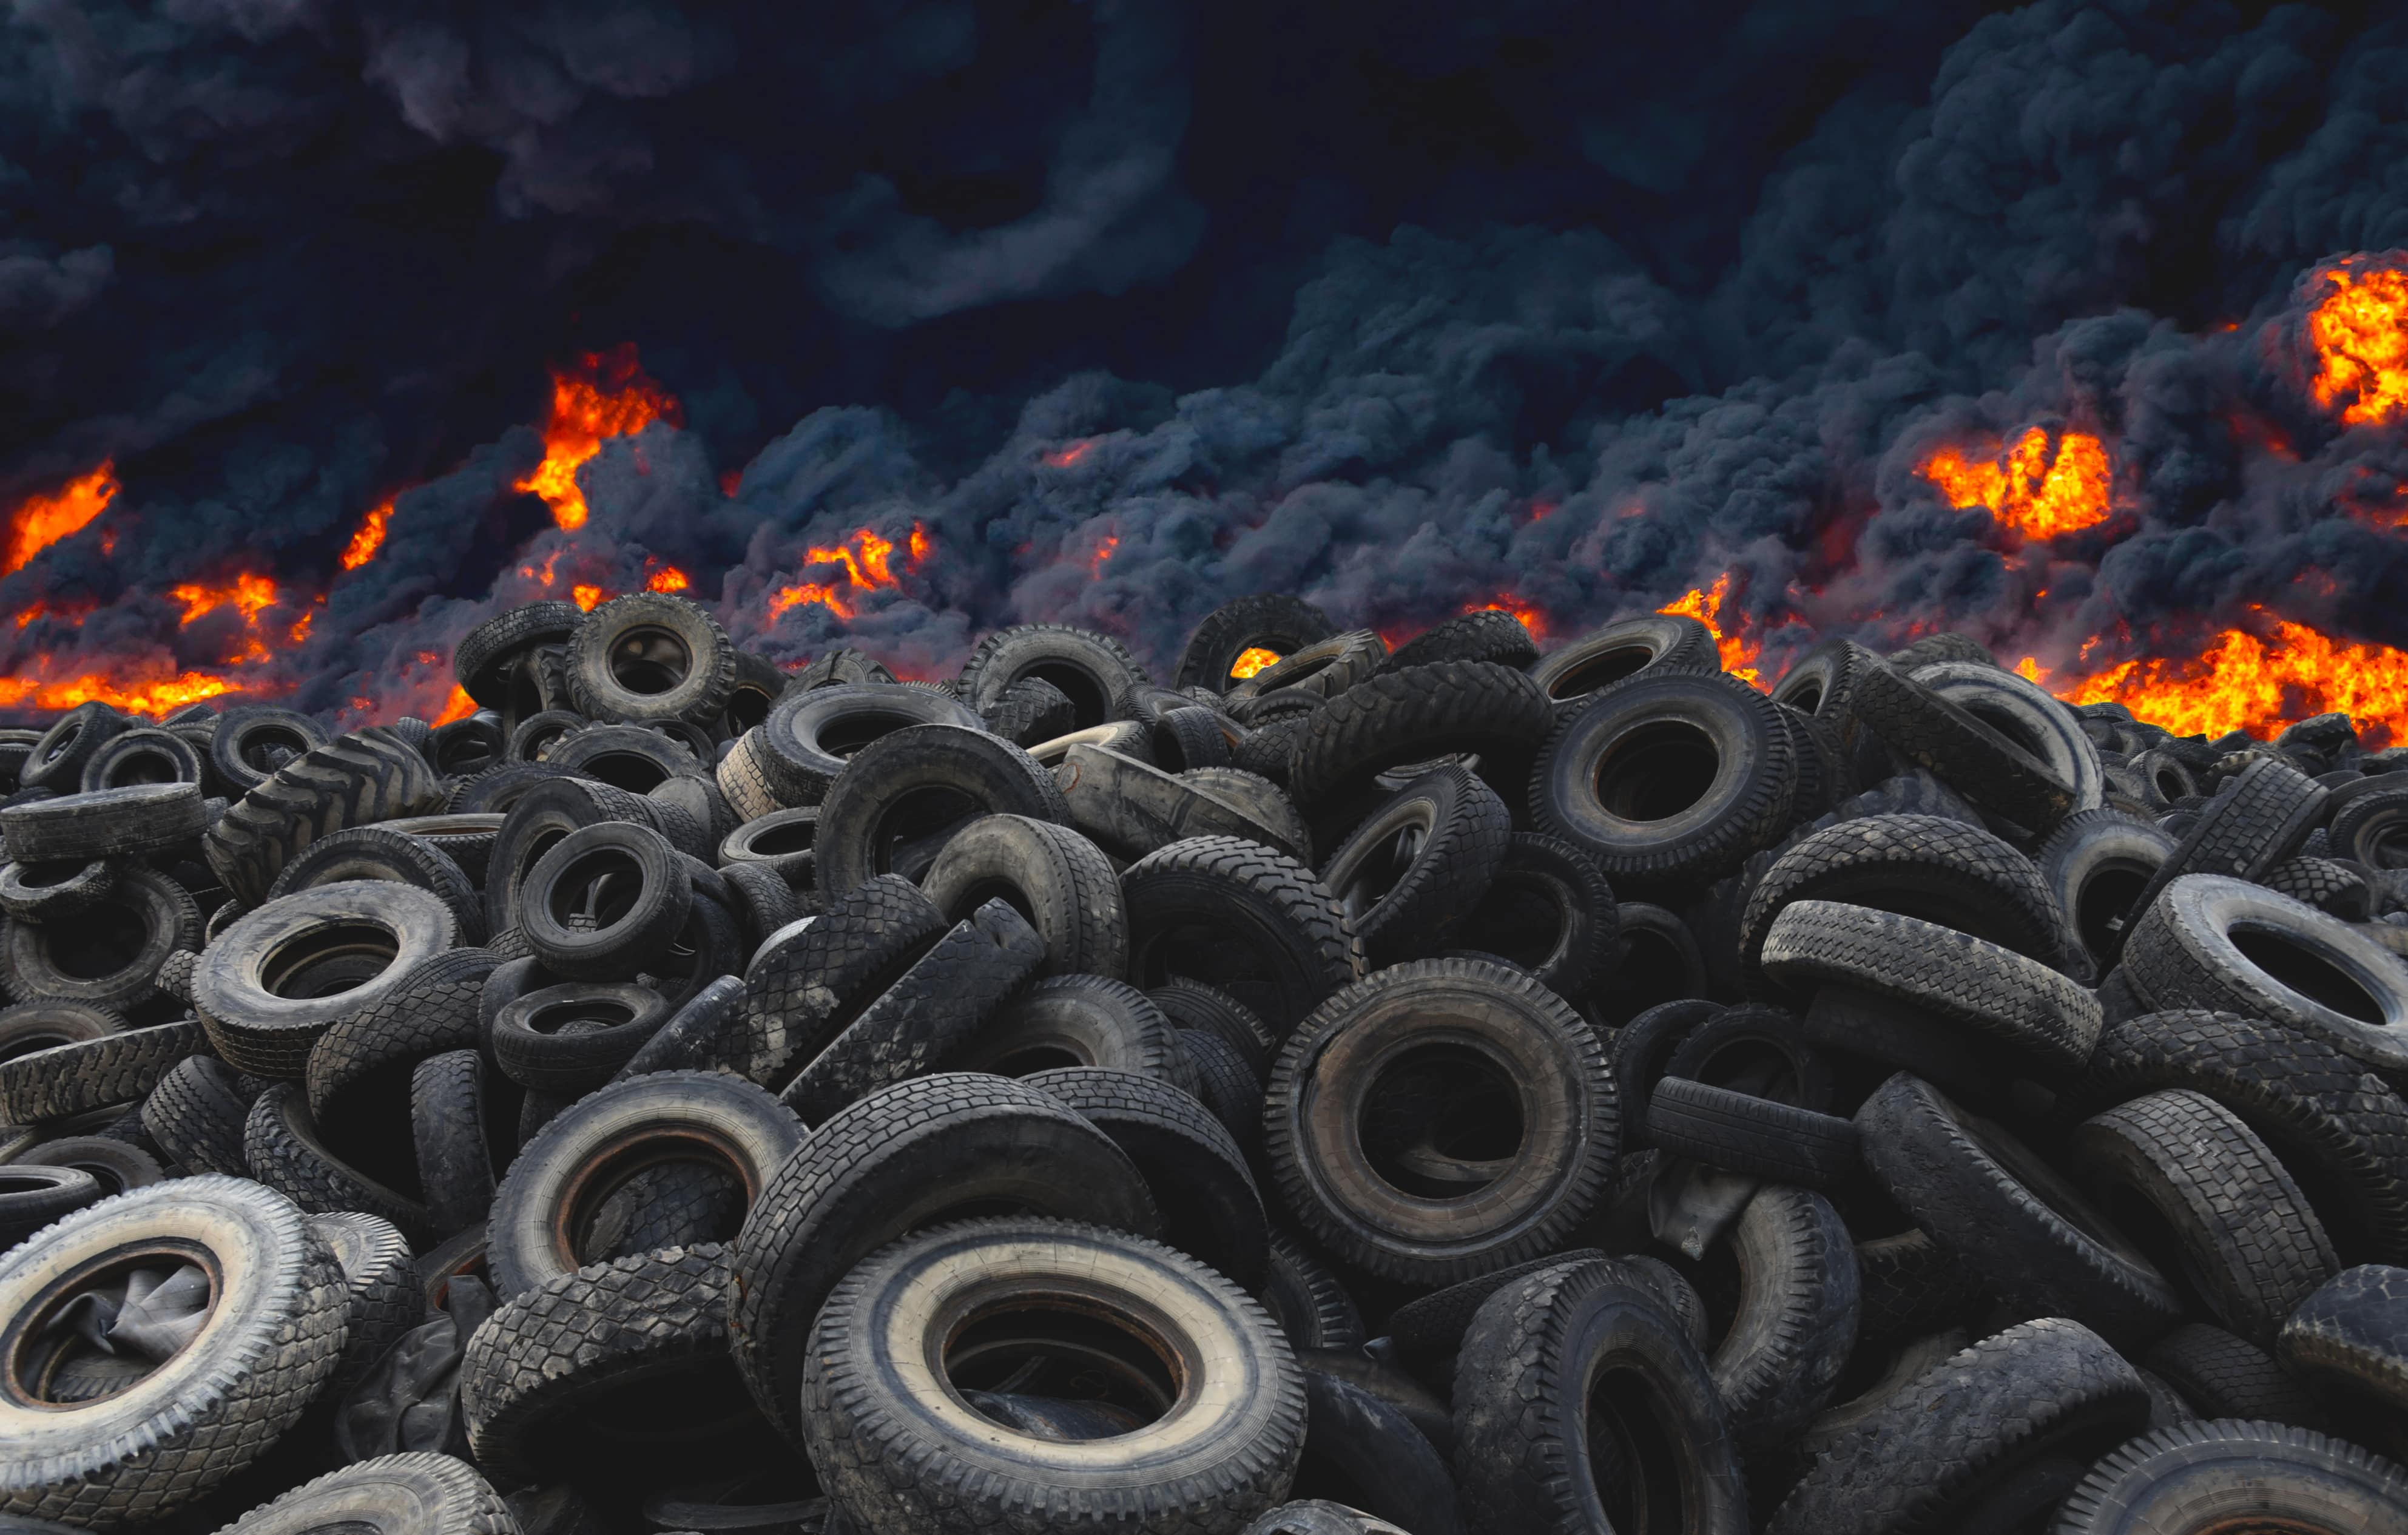 A lot of tires on fire